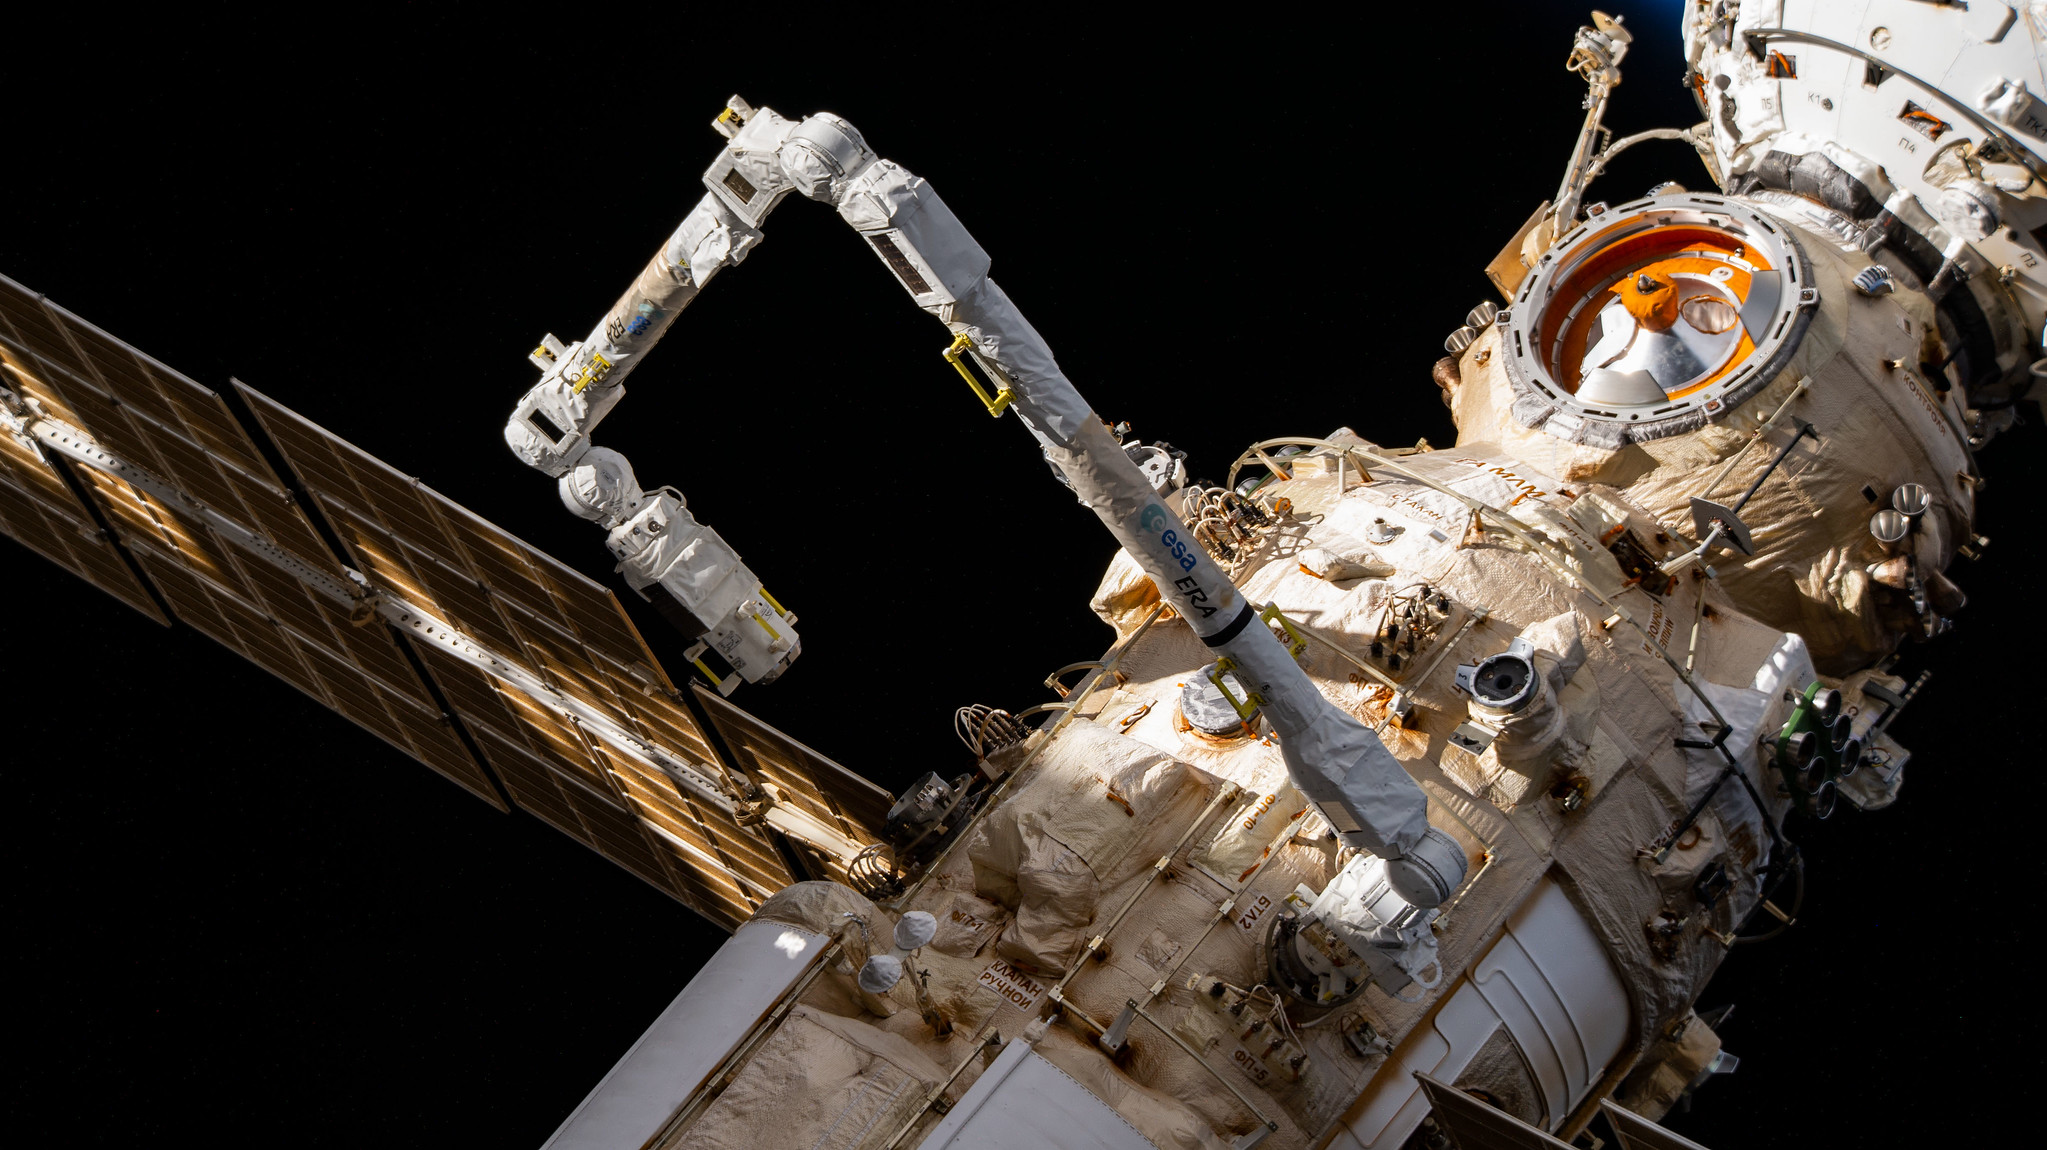 The European robotic arm (ERA) is pictured extending out from the Nauka multipurpose laboratory module during a mobility test.